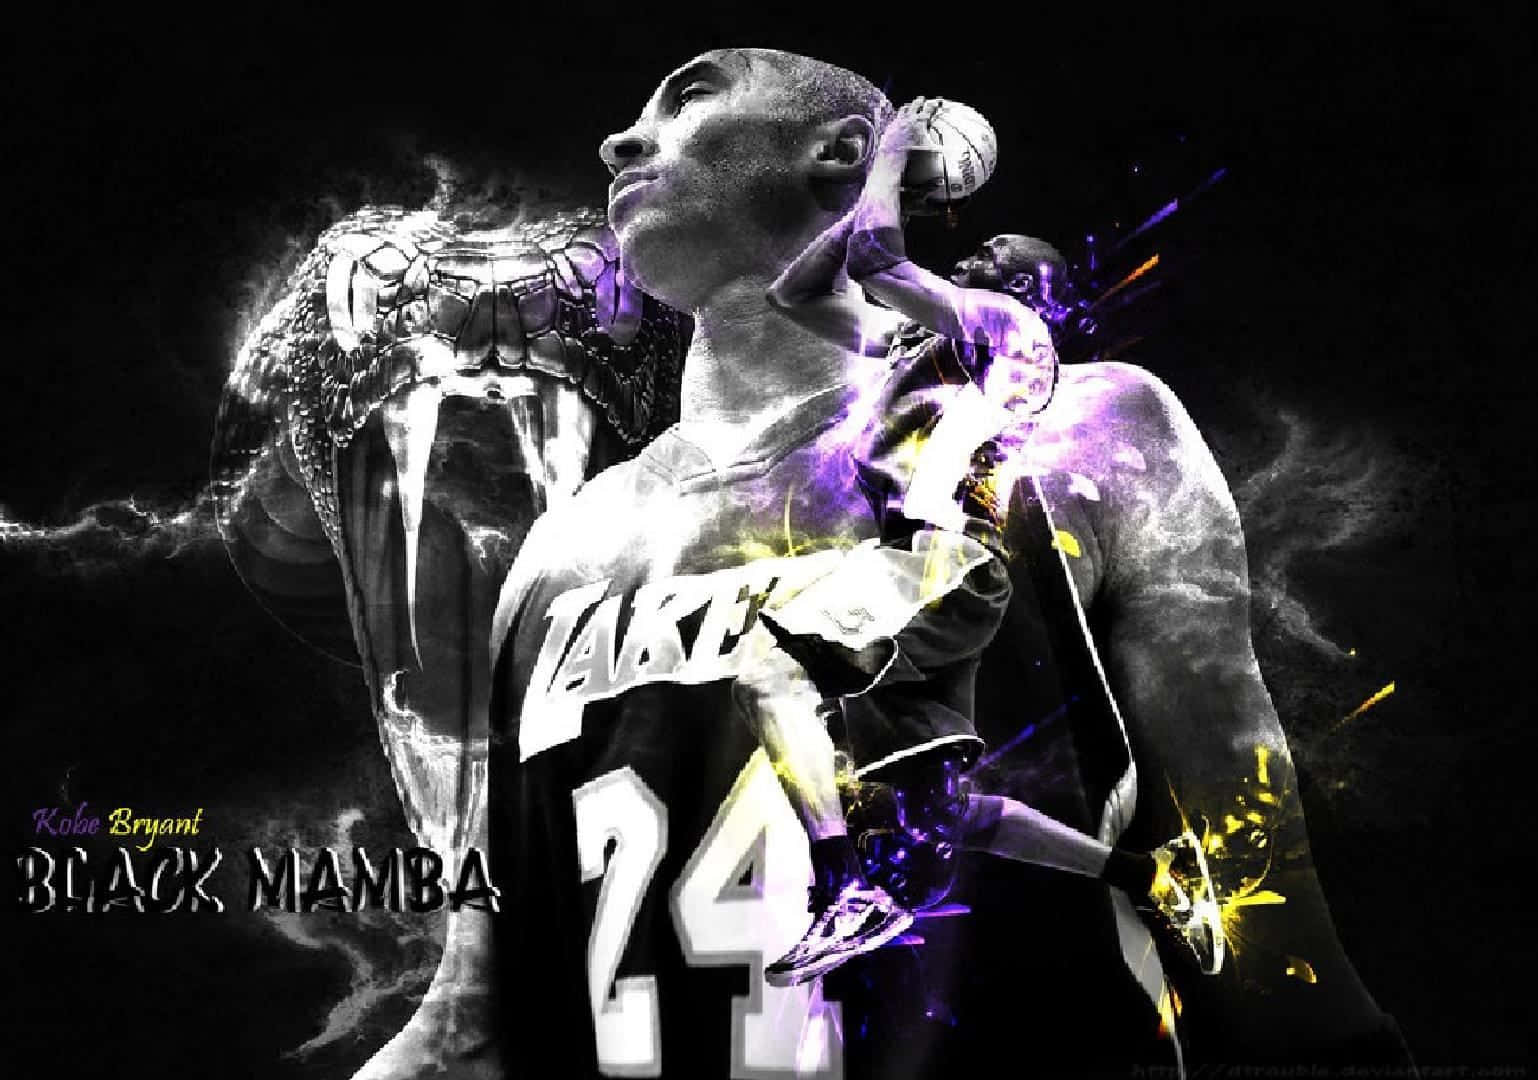 "Live Life to its Fullest with Mamba Out" Wallpaper